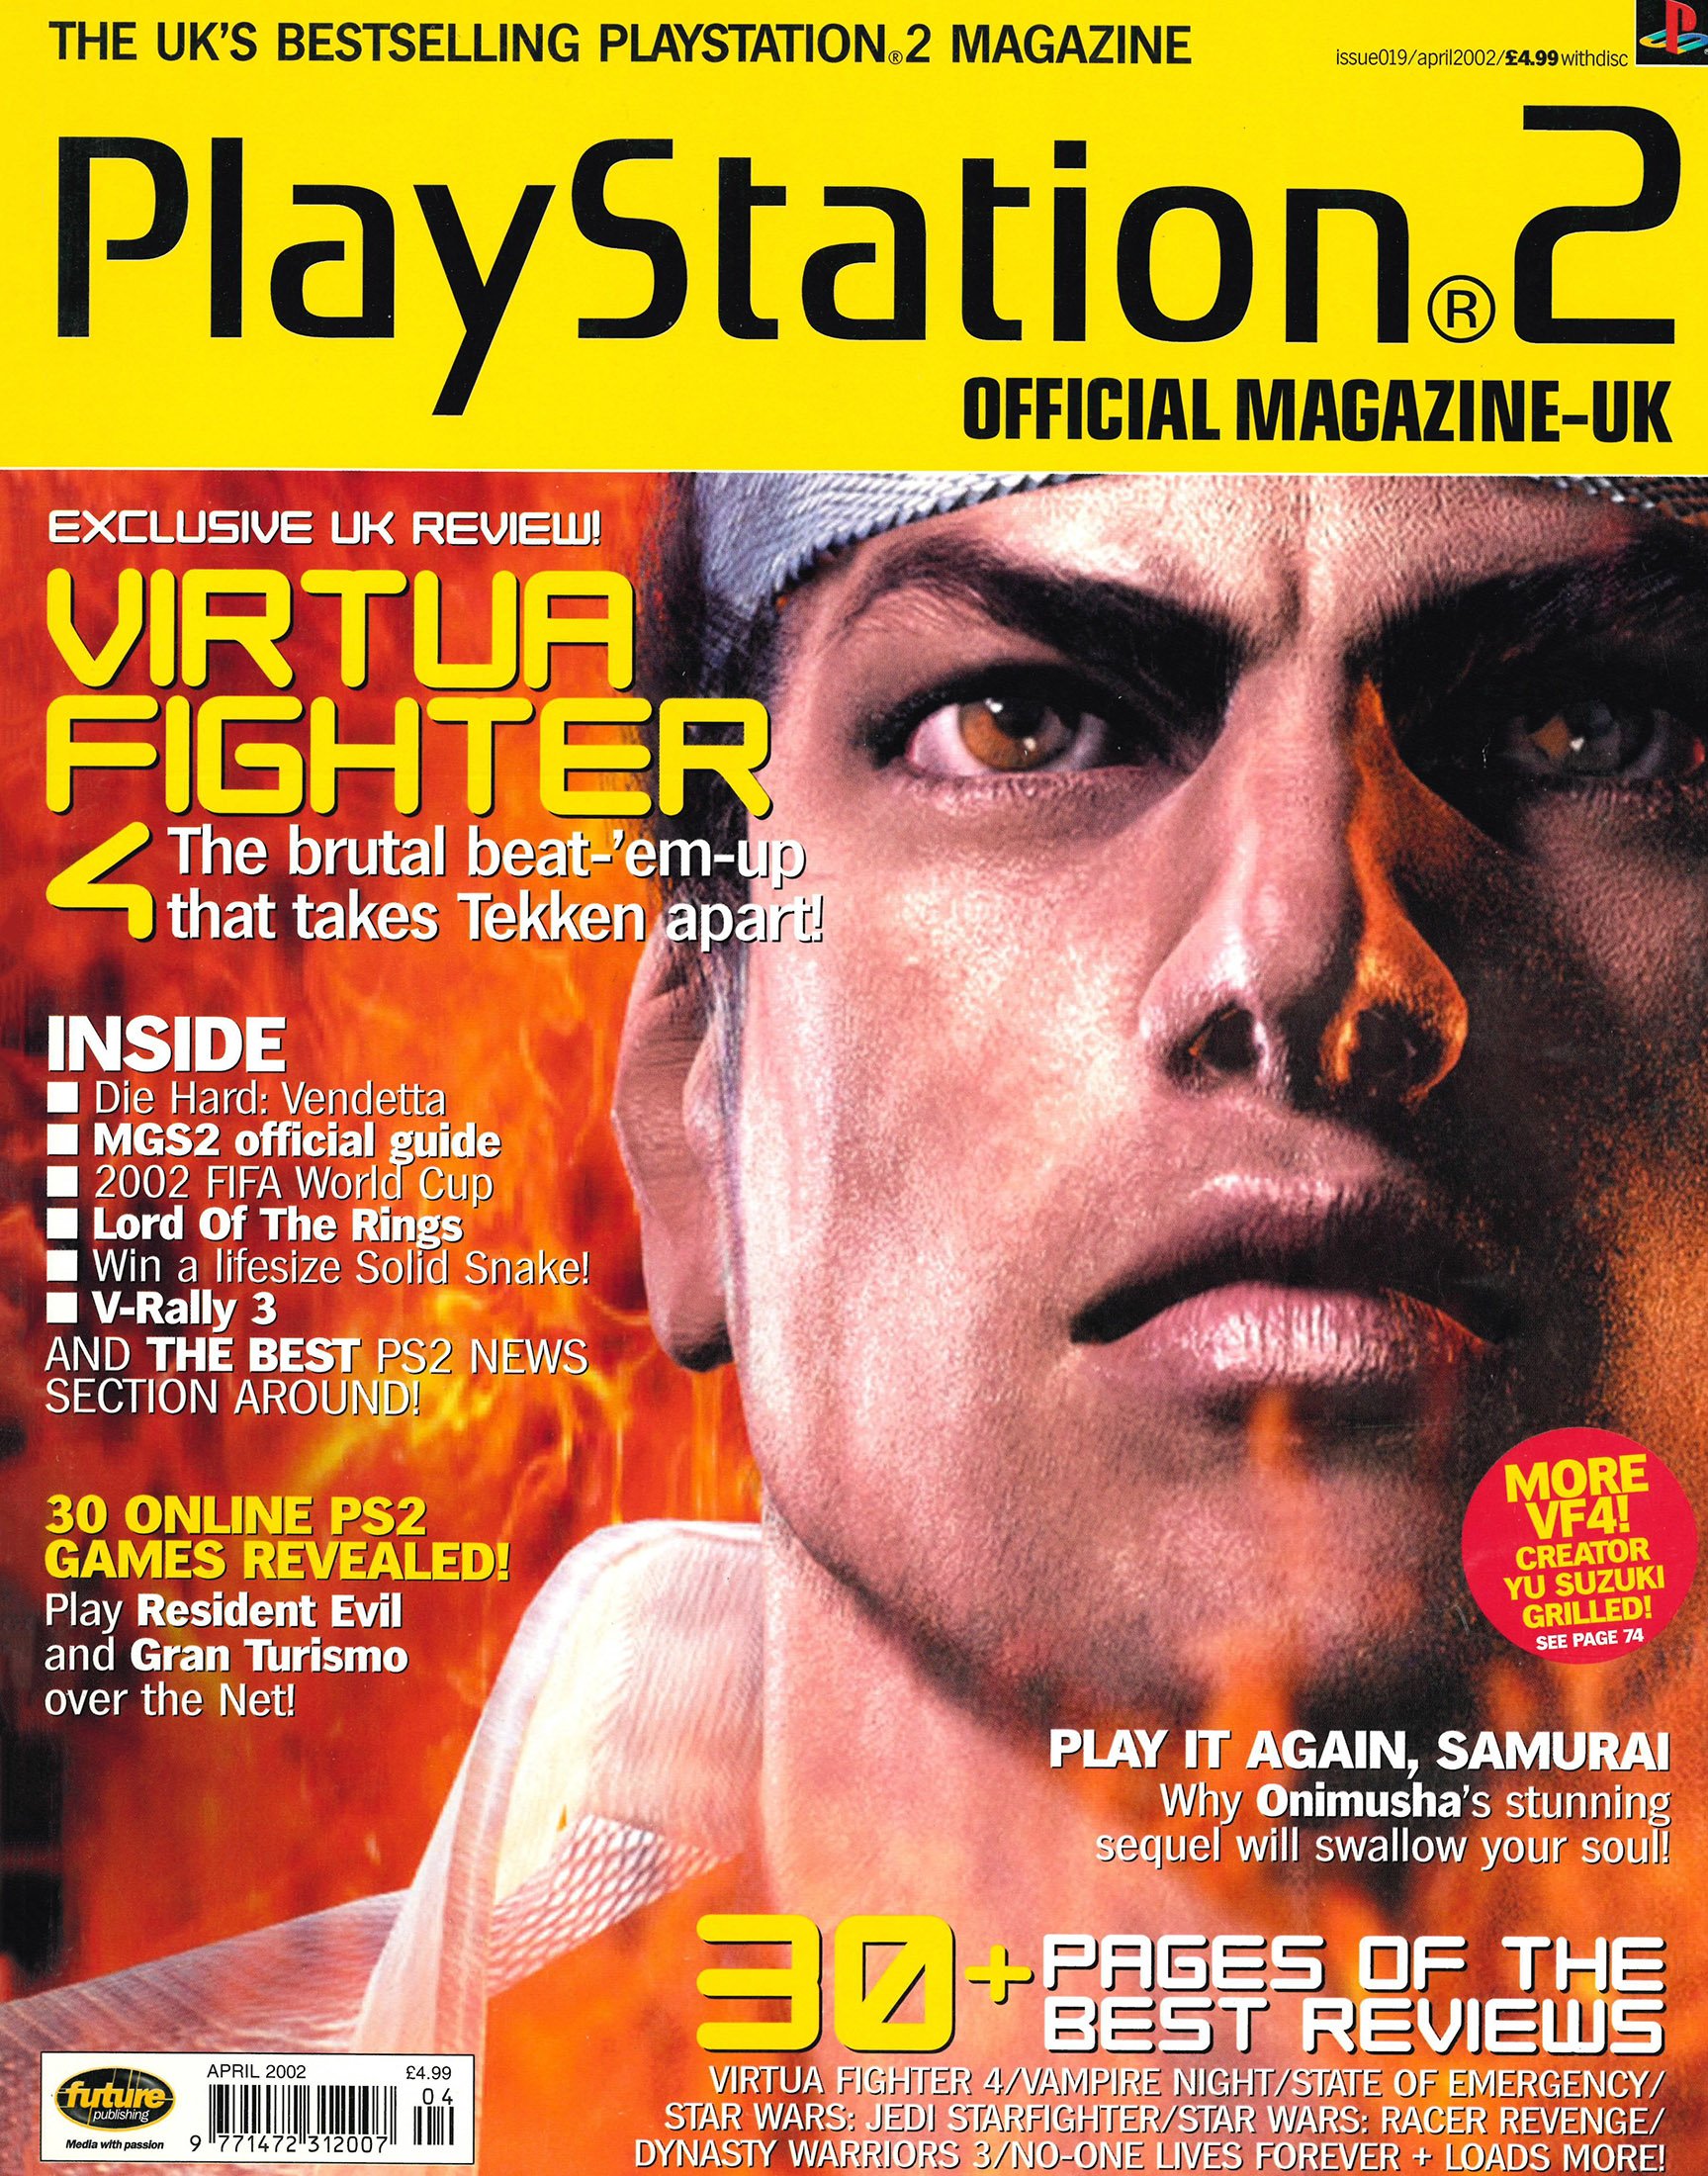 Magazine 2. Ps2 Official Magazine. Official PLAYSTATION Magazine uk. Die hard Vendetta ps2. Last Issue of Official PLAYSTATION Magazine.